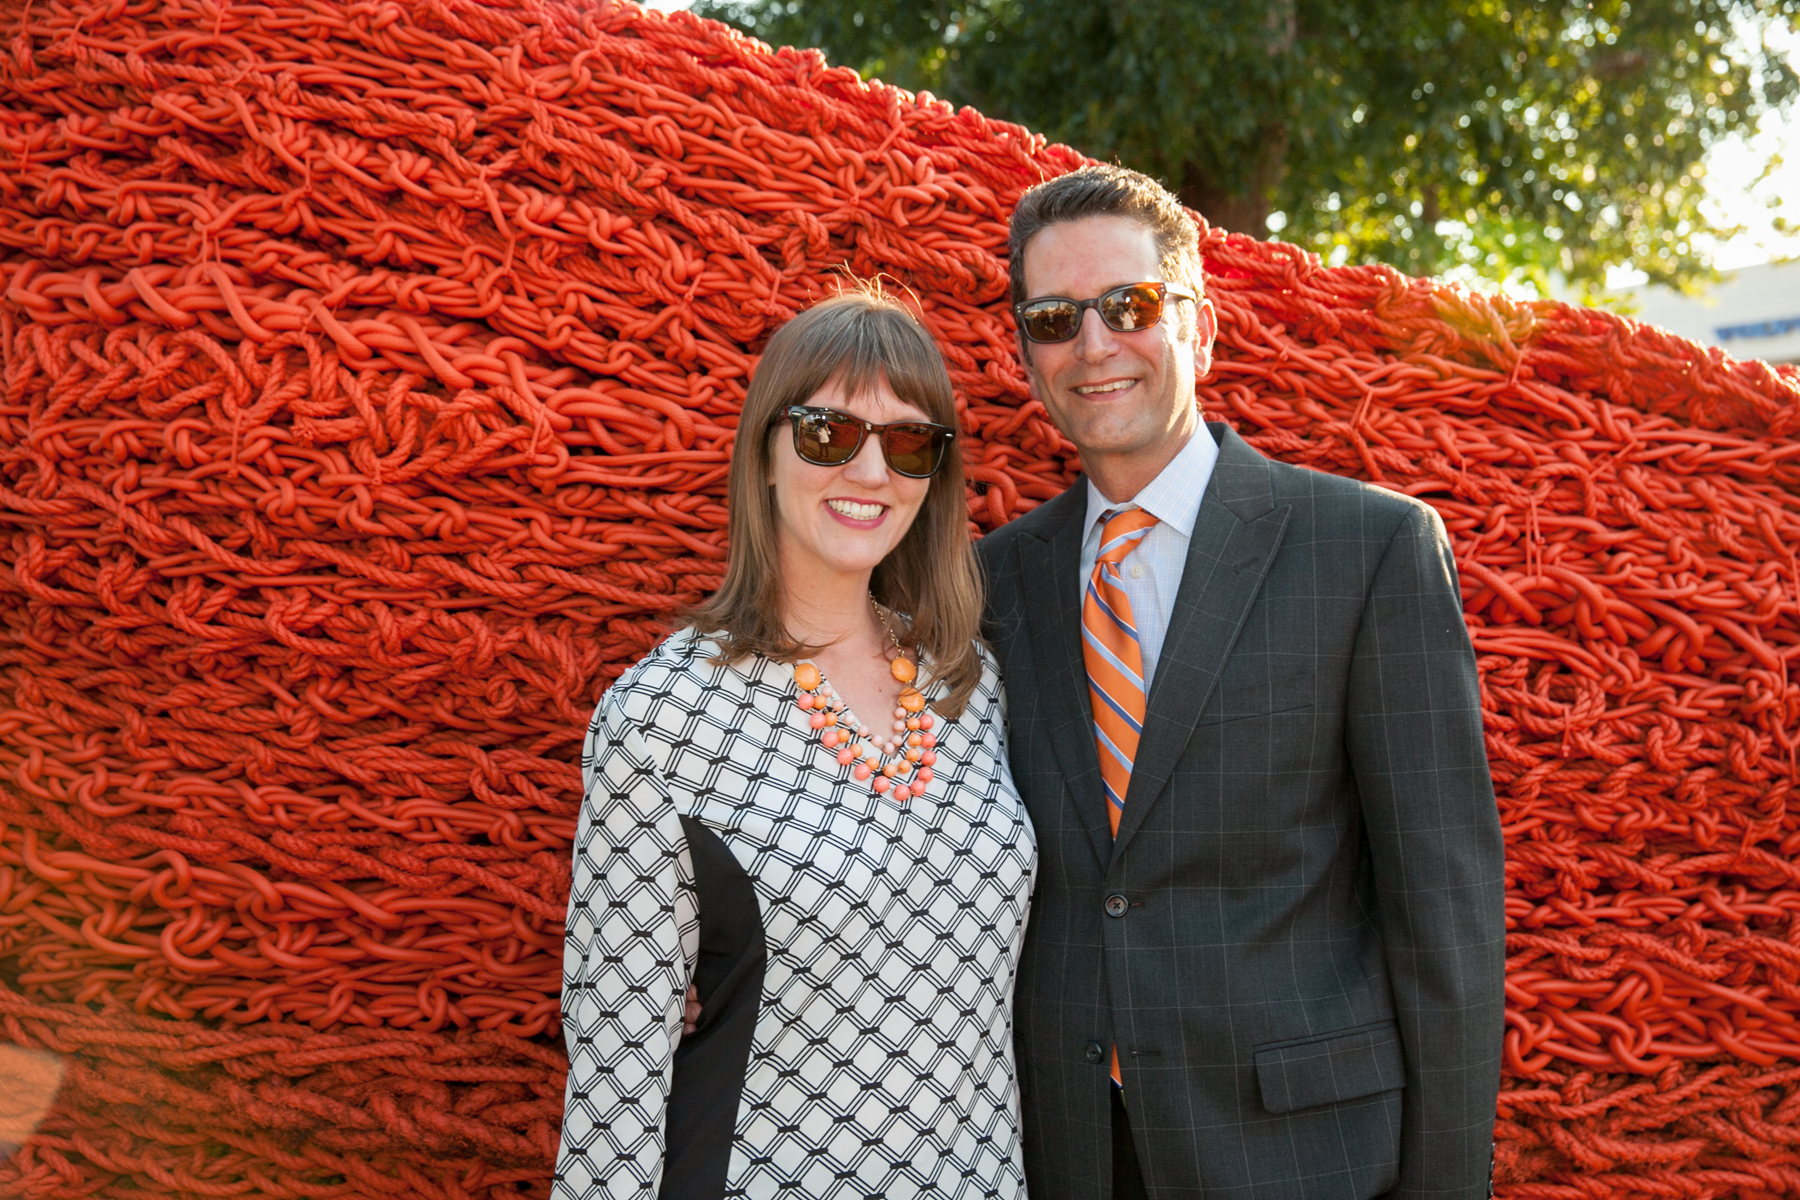 A couple smiles at the camera, dressed in a black in white patterned dress and a dark gray suit. They are standing against a wall of red lobster rope.